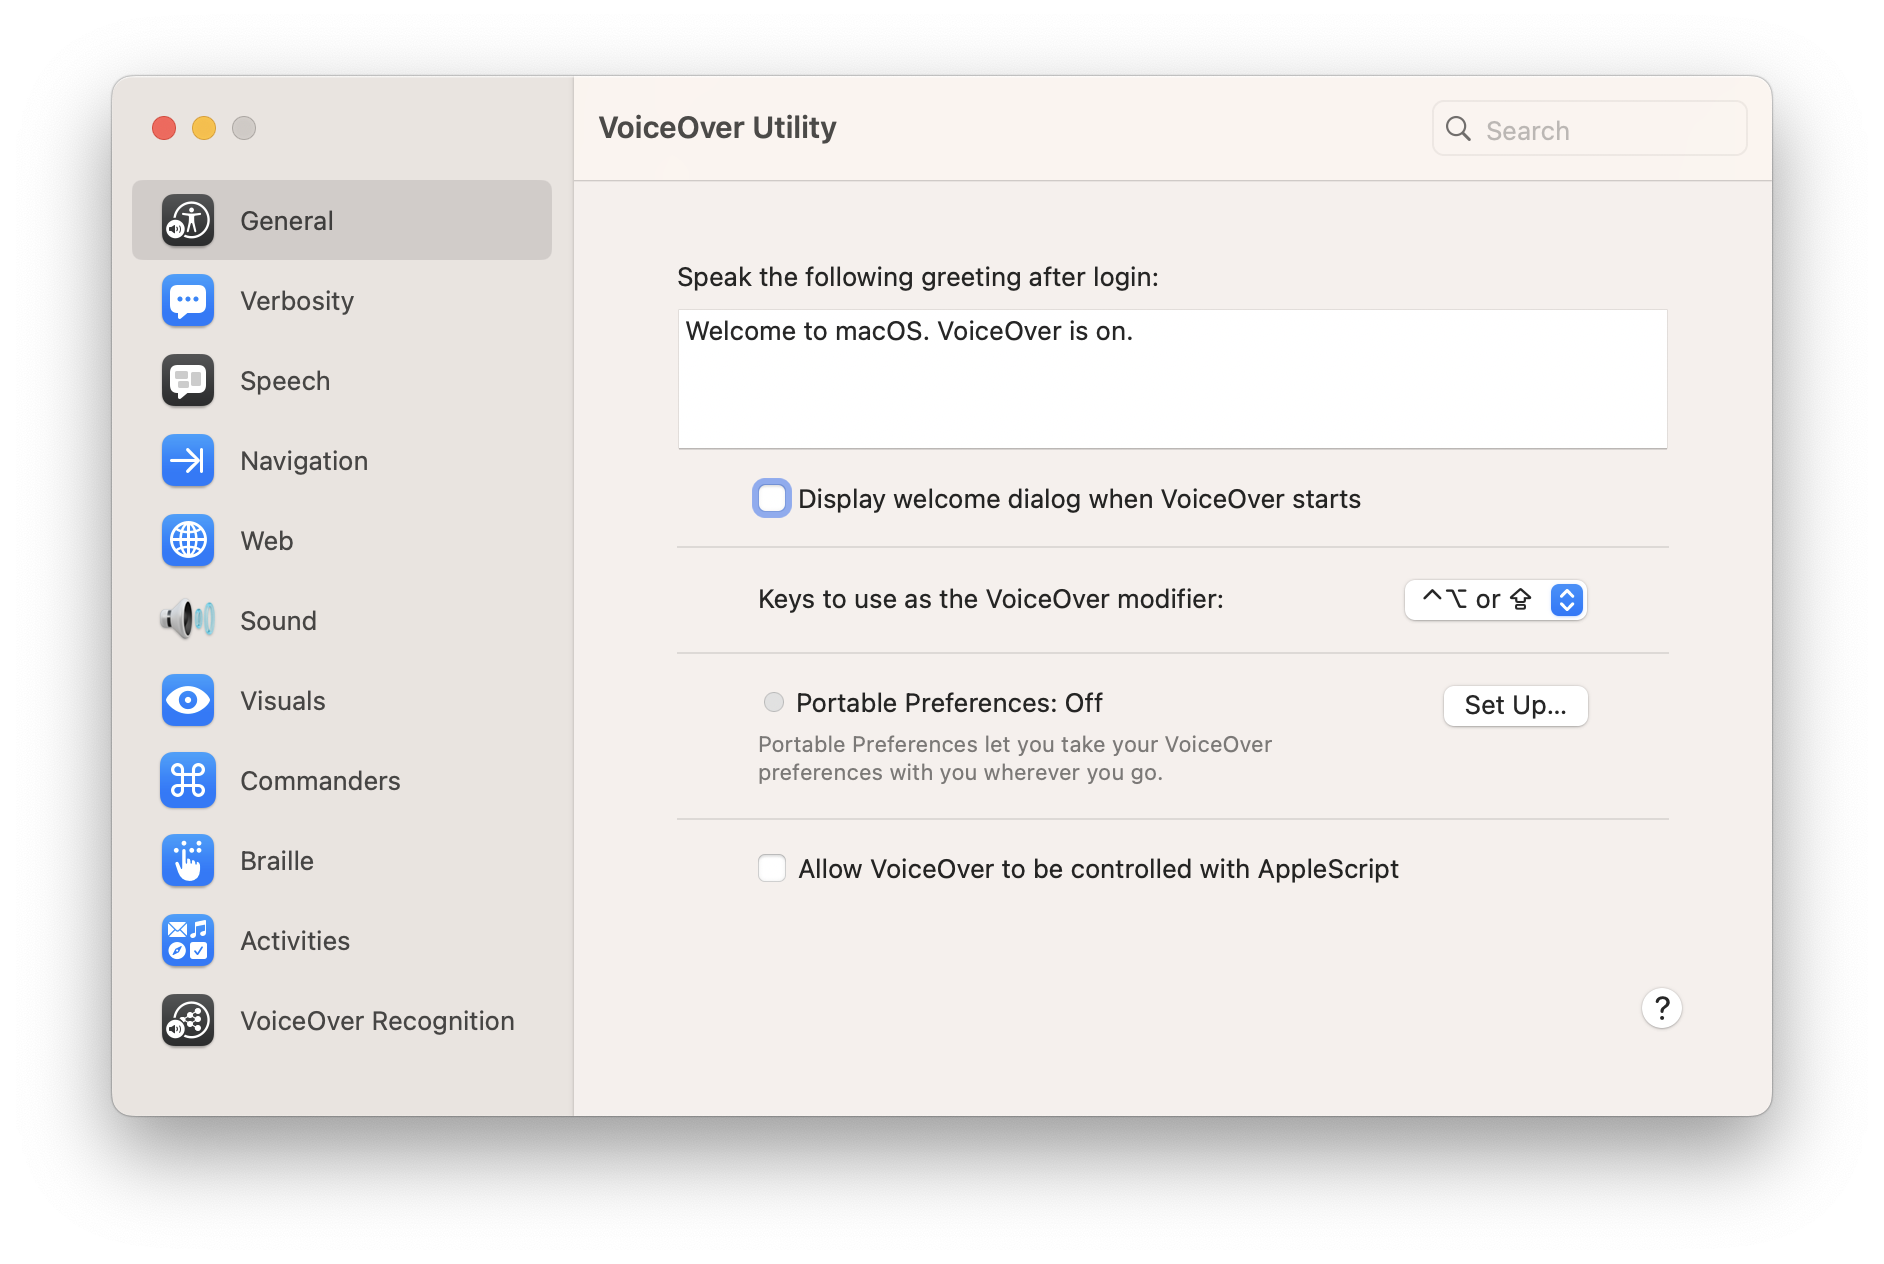 Screenshot: VoiceOver Utility (Selecting "General")